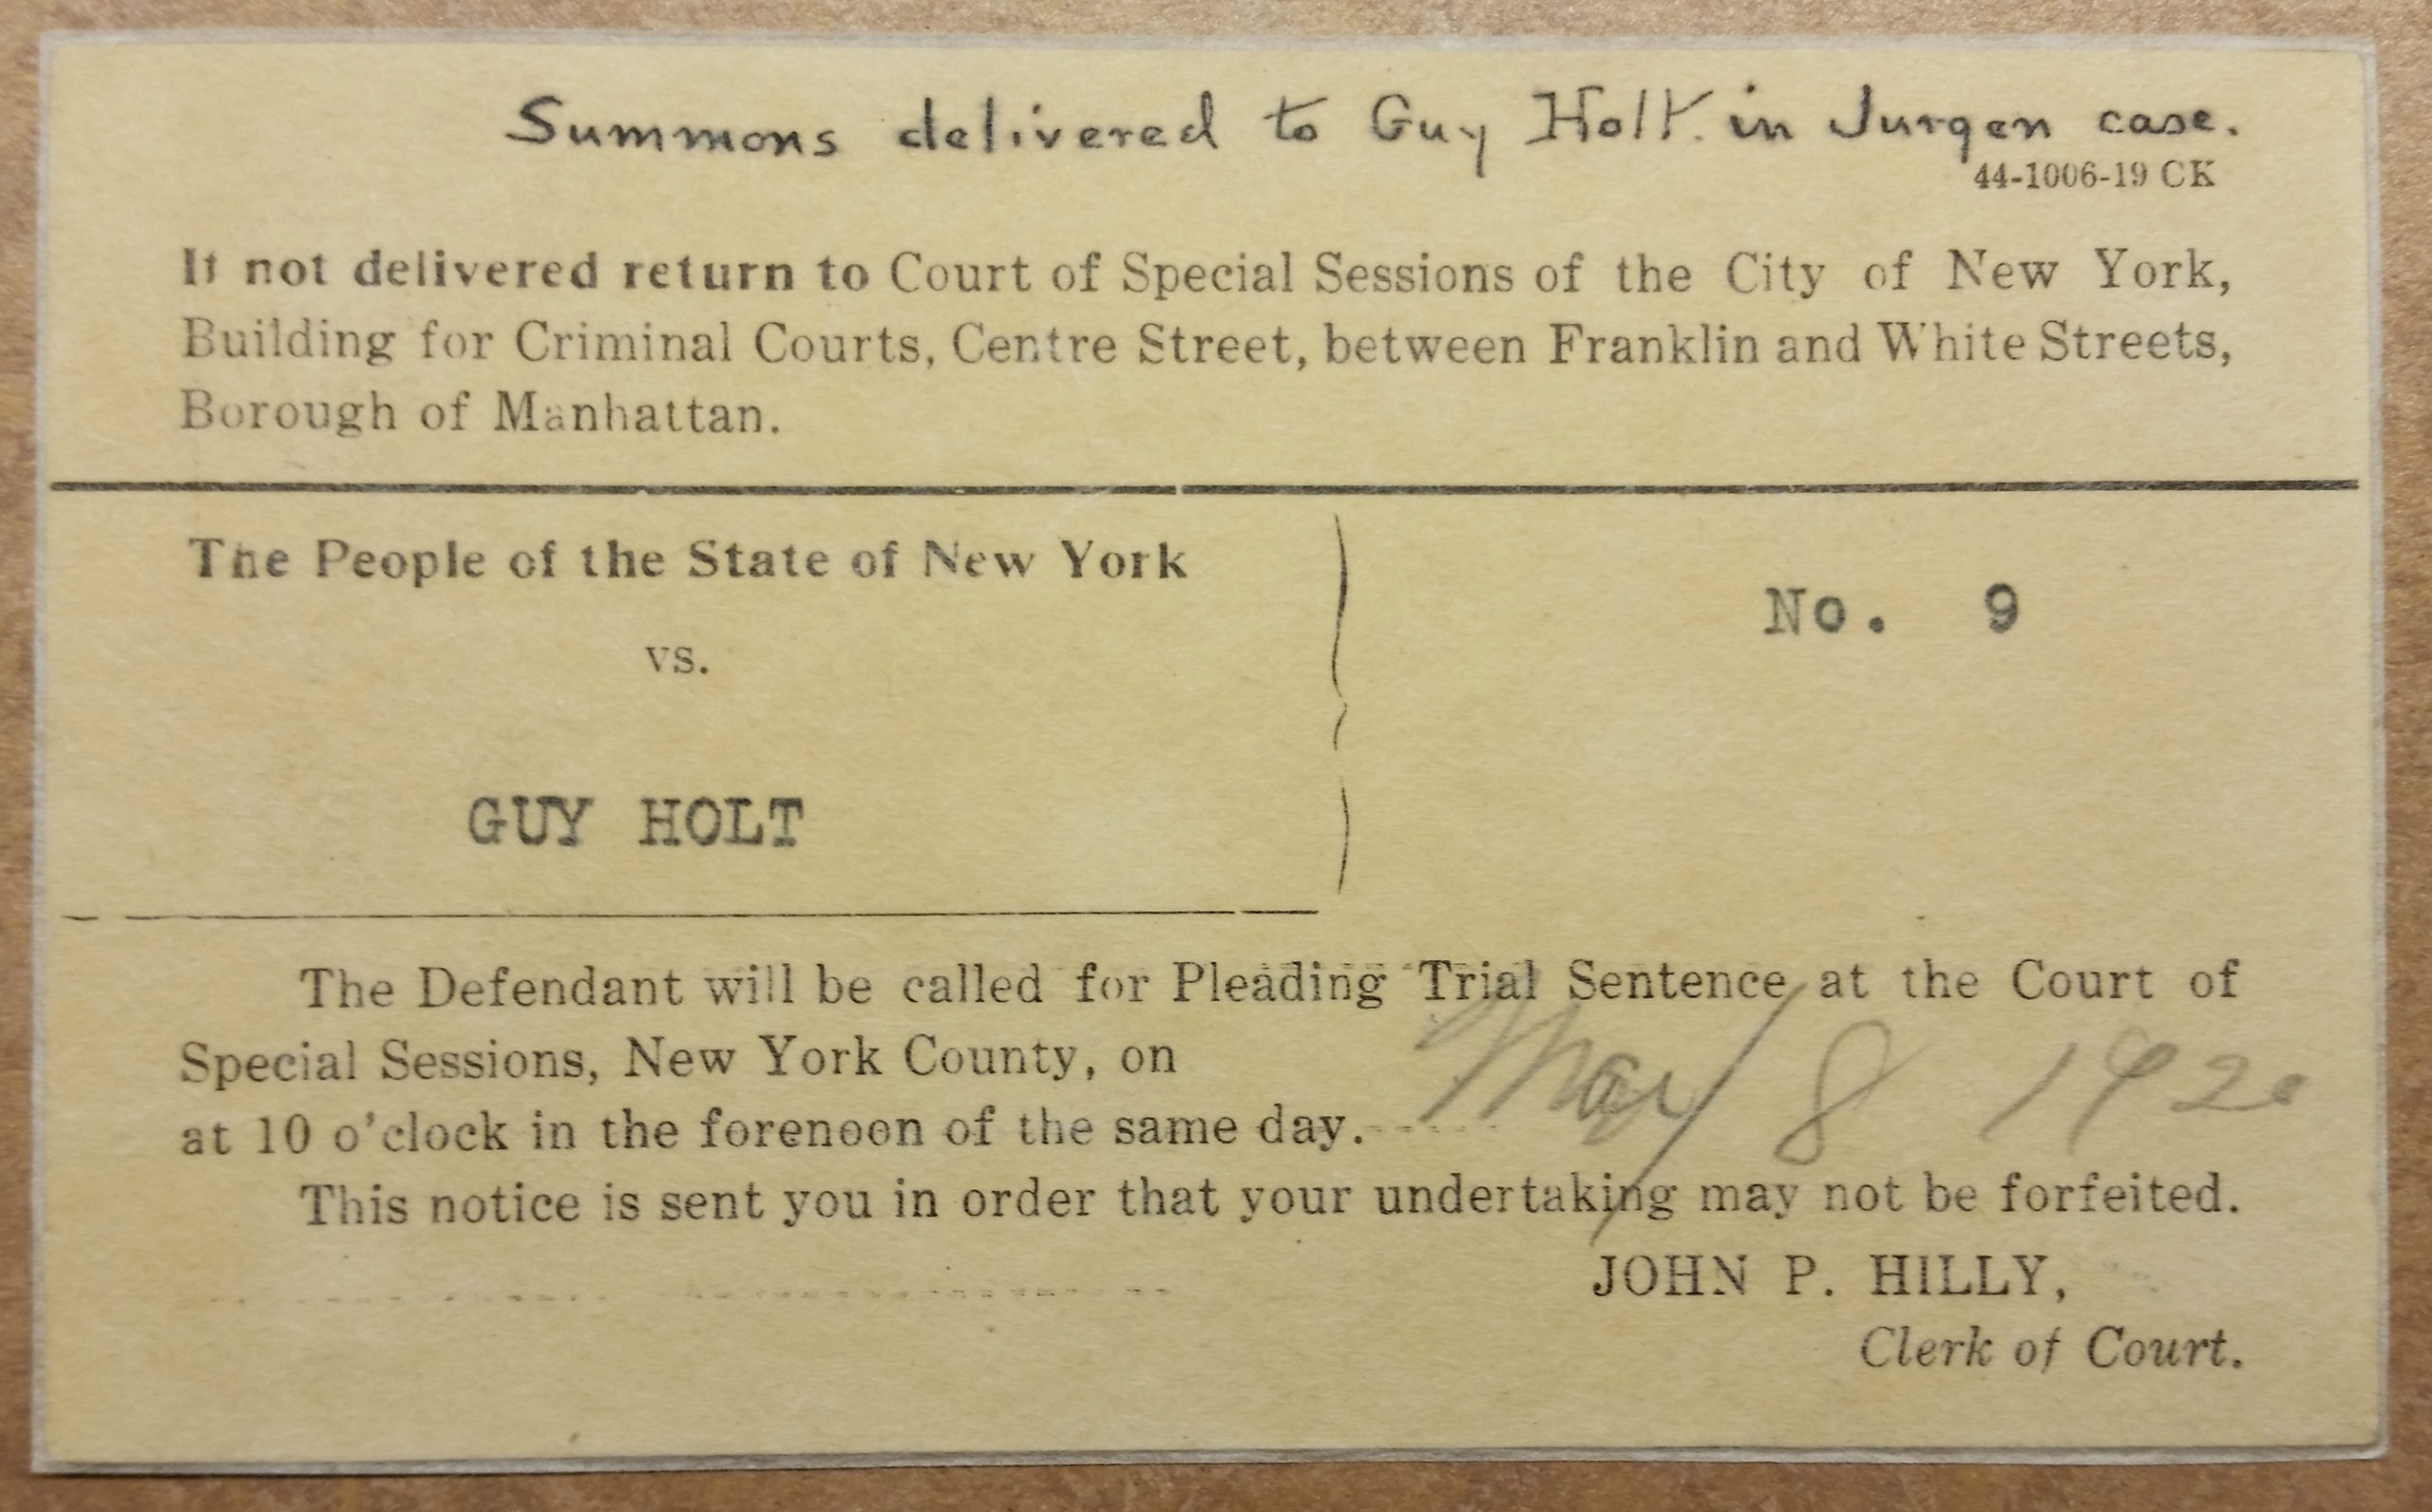 Summons delivered to editor Guy Holt